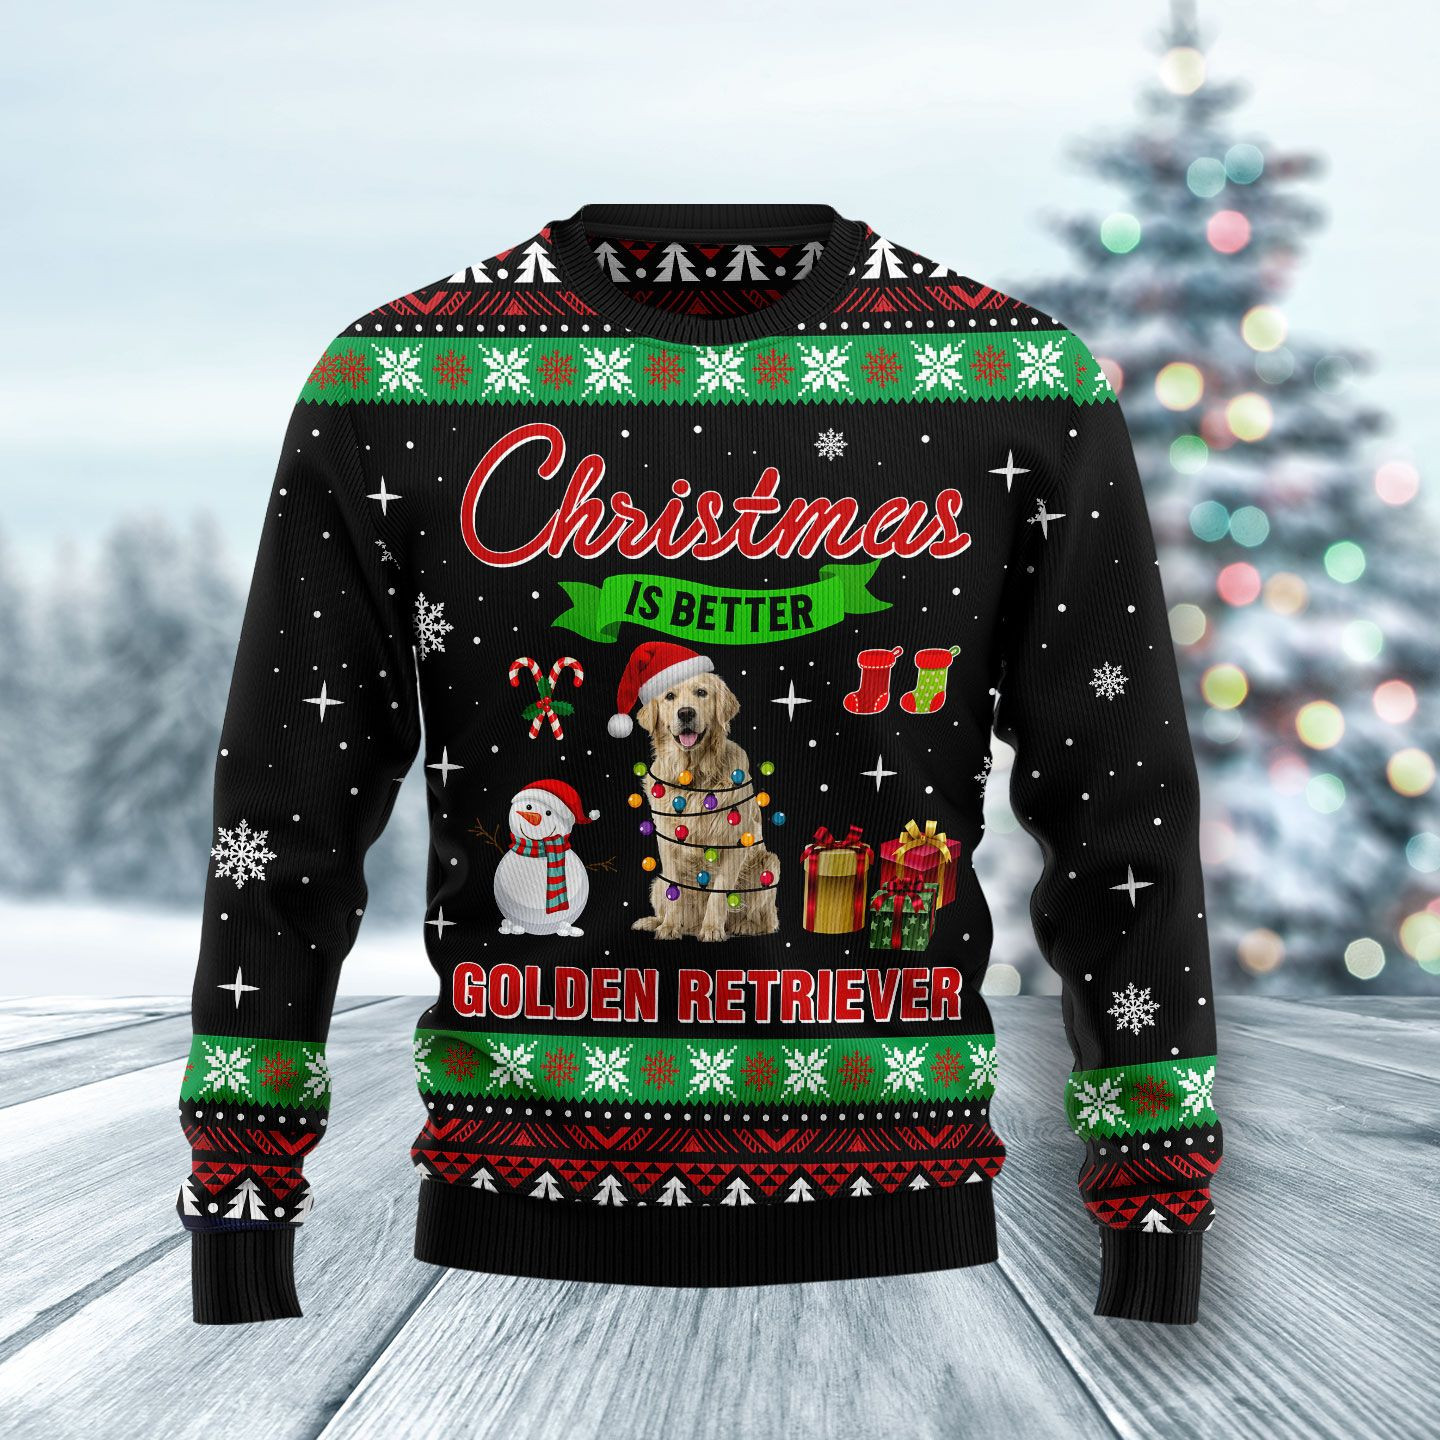 Christmas Is Better With Golden Retriever Ugly Christmas Sweater Ugly Sweater For Men Women, Holiday Sweater